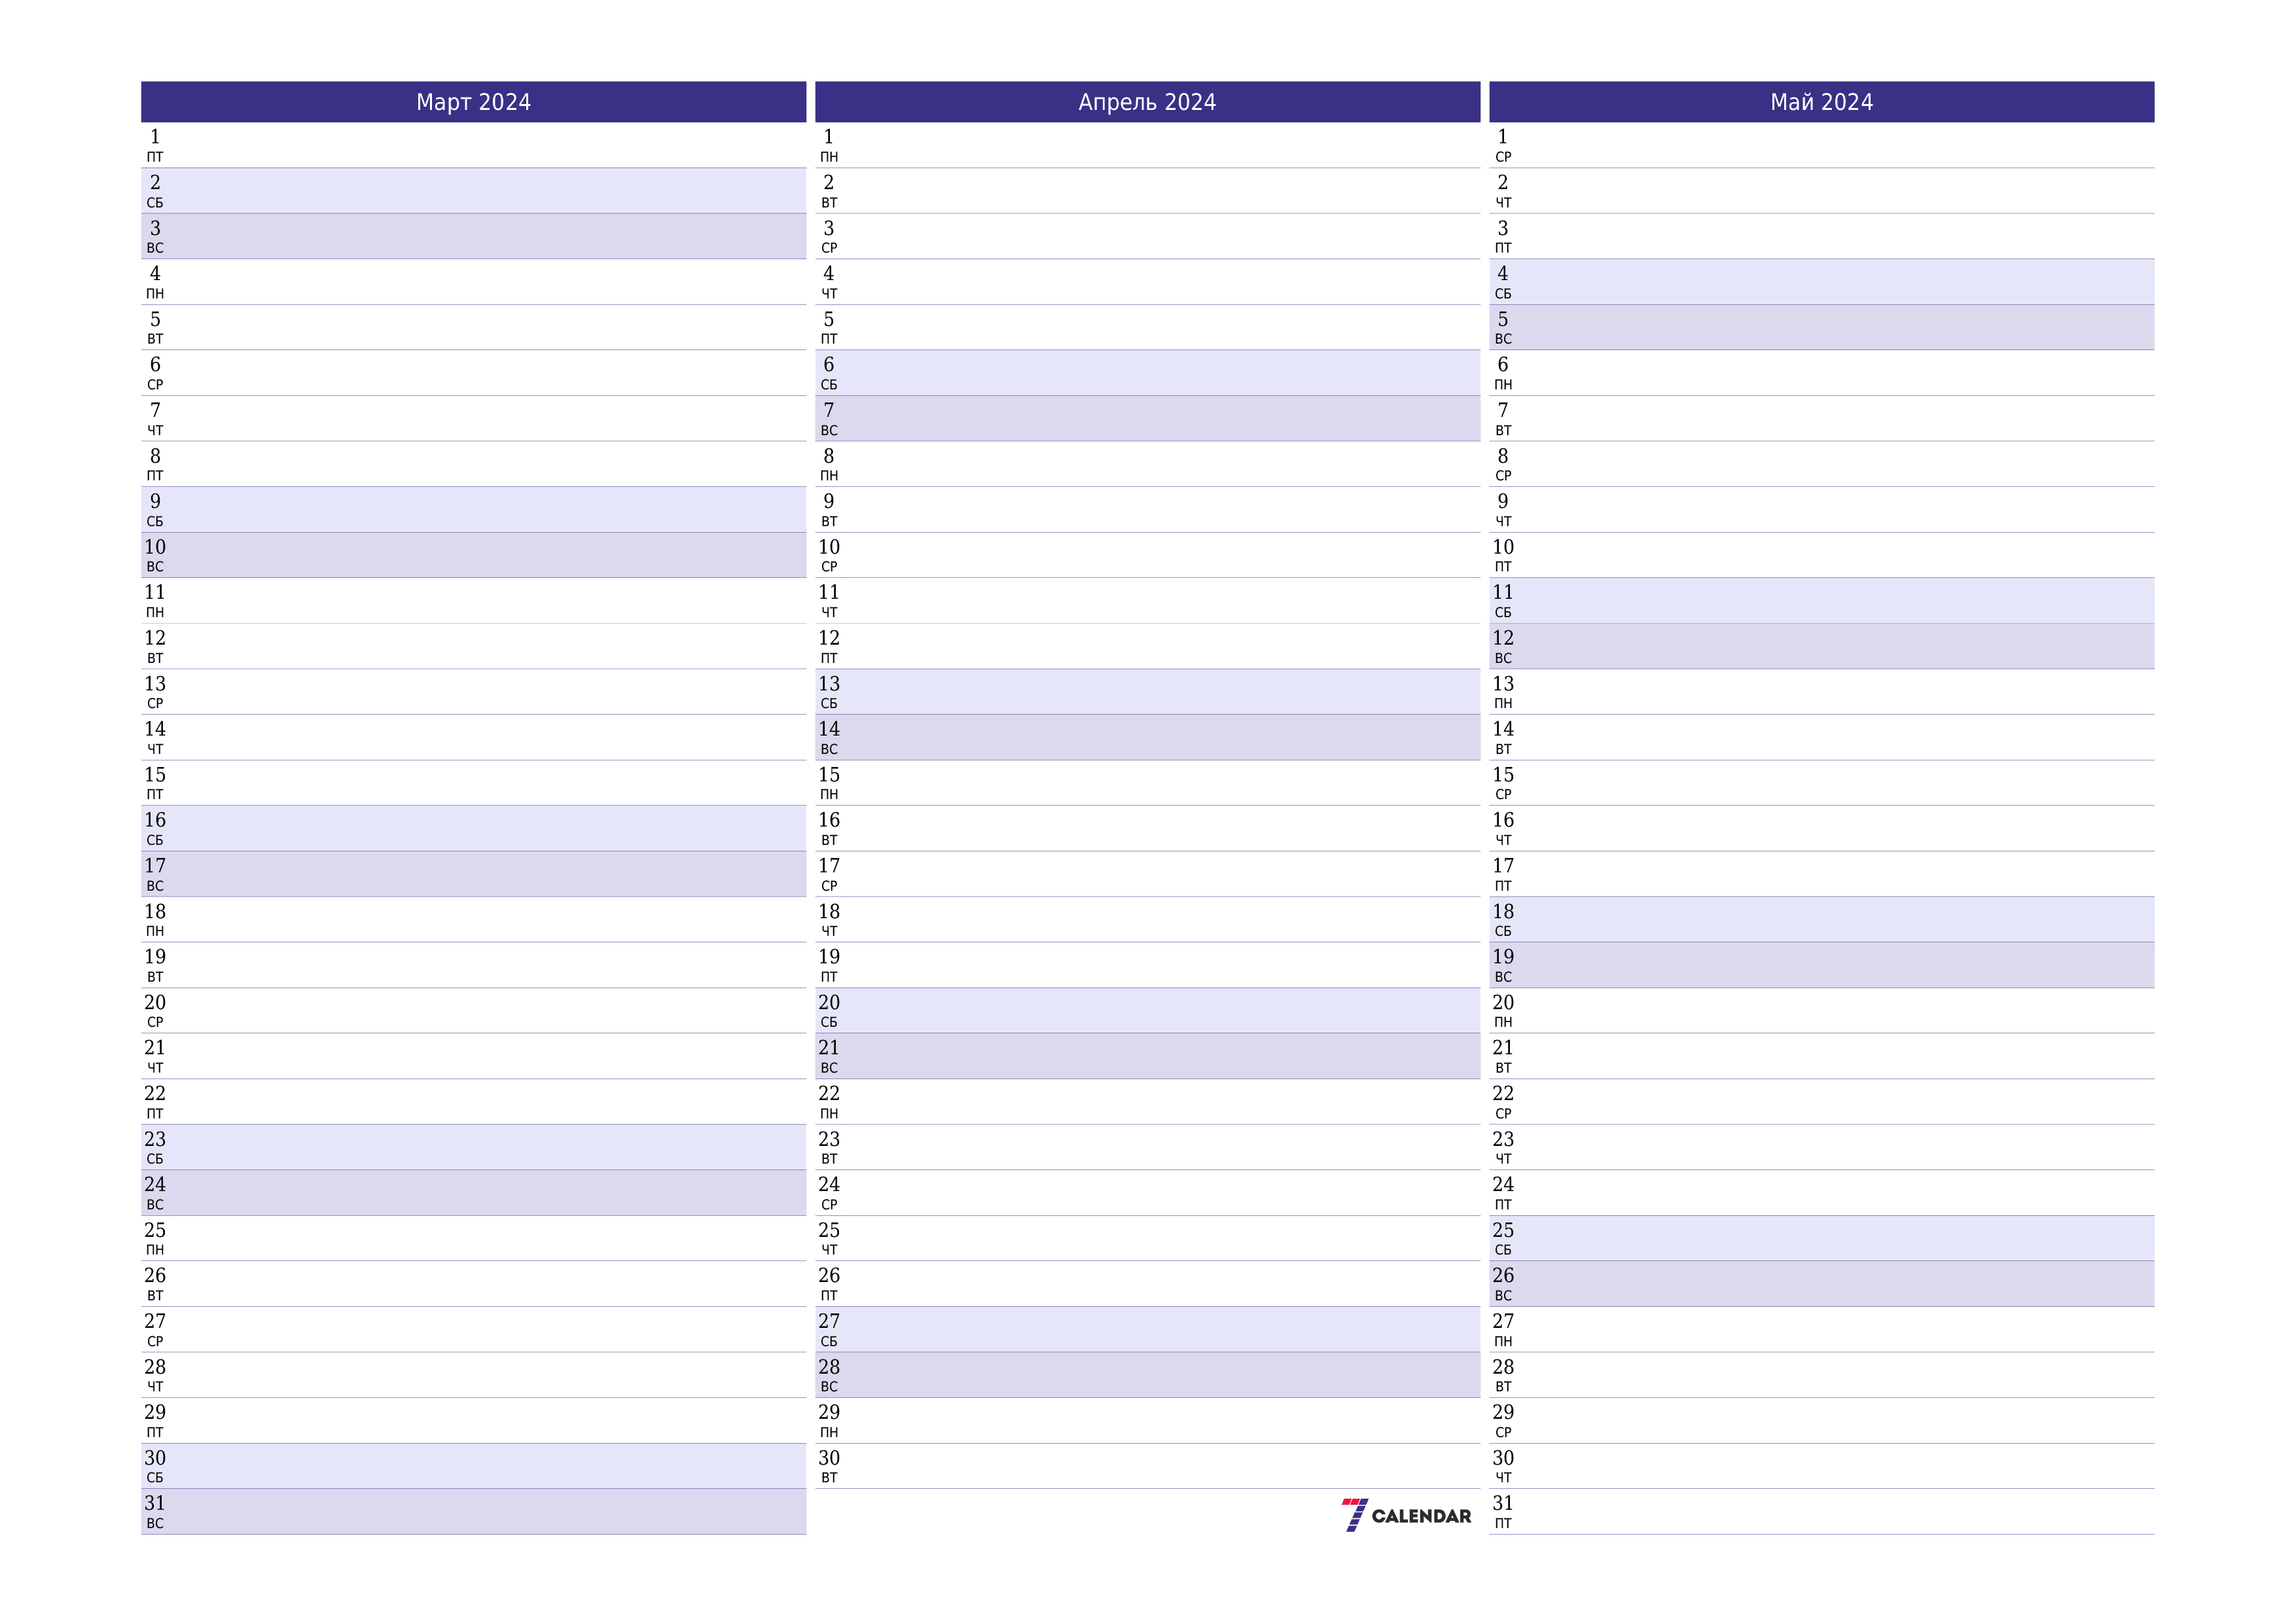 calendar 3 months March, April, May 2024